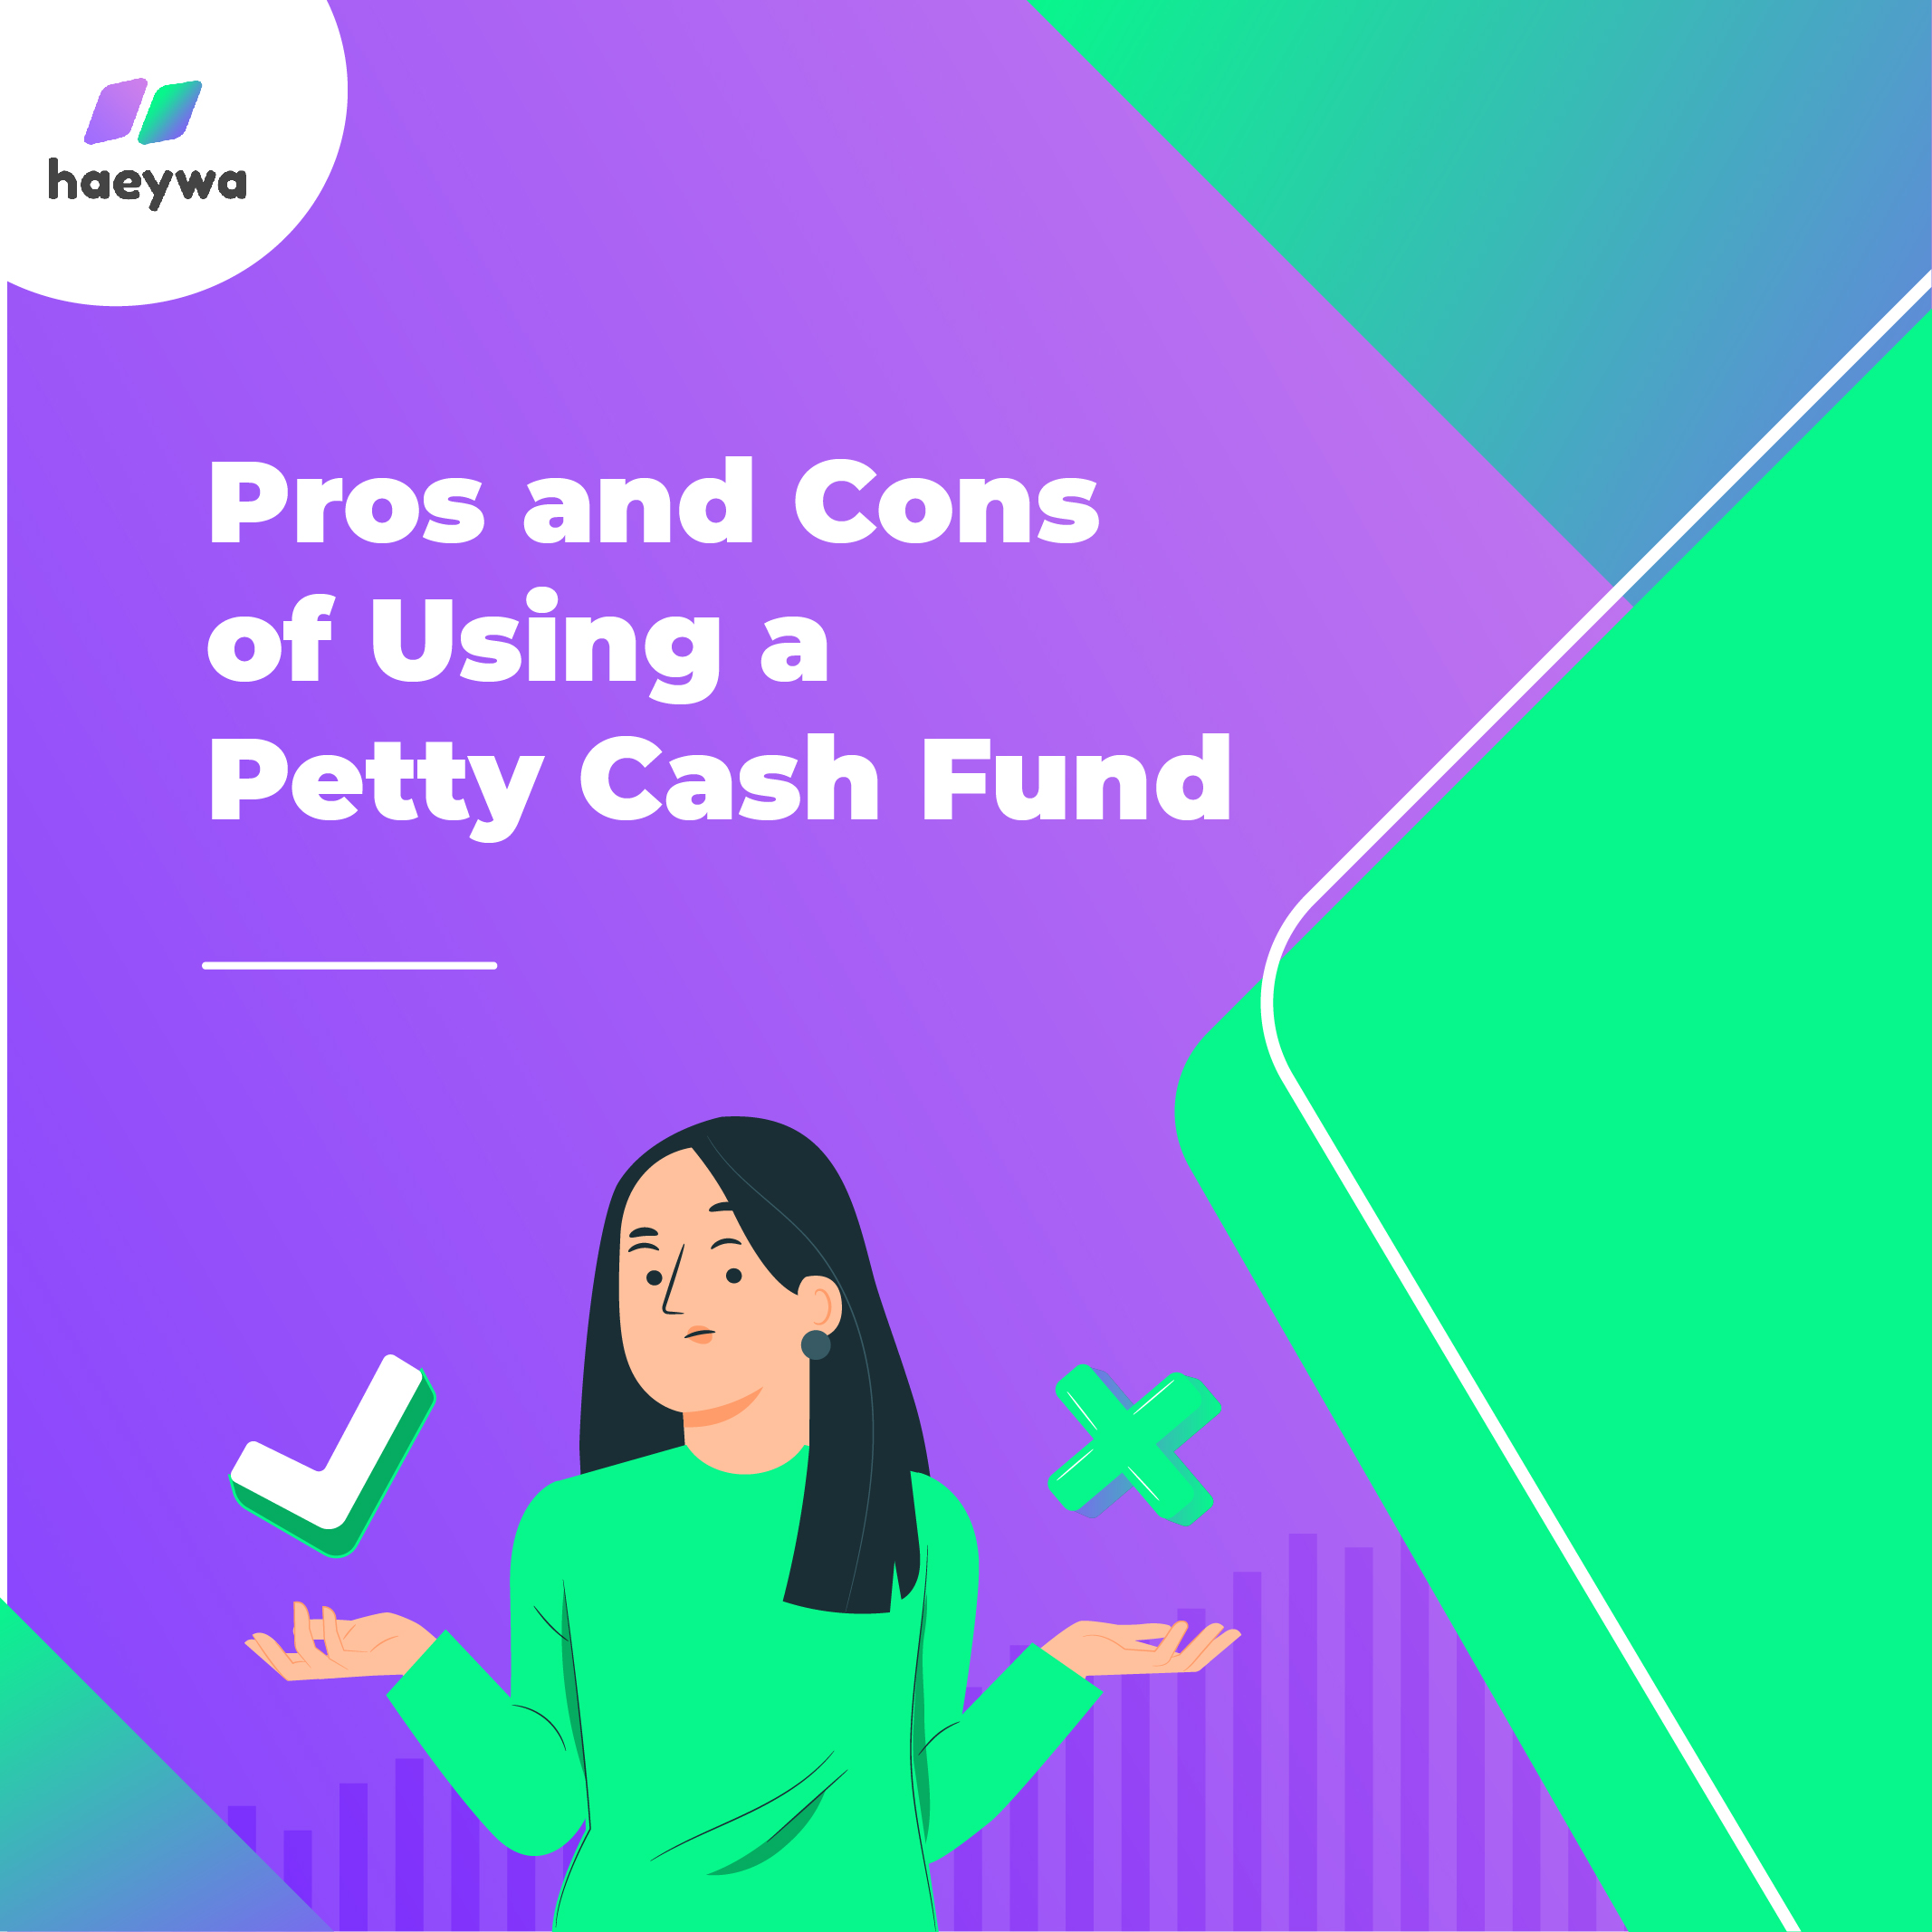  Pros and Cons of Using a Petty Cash Fund